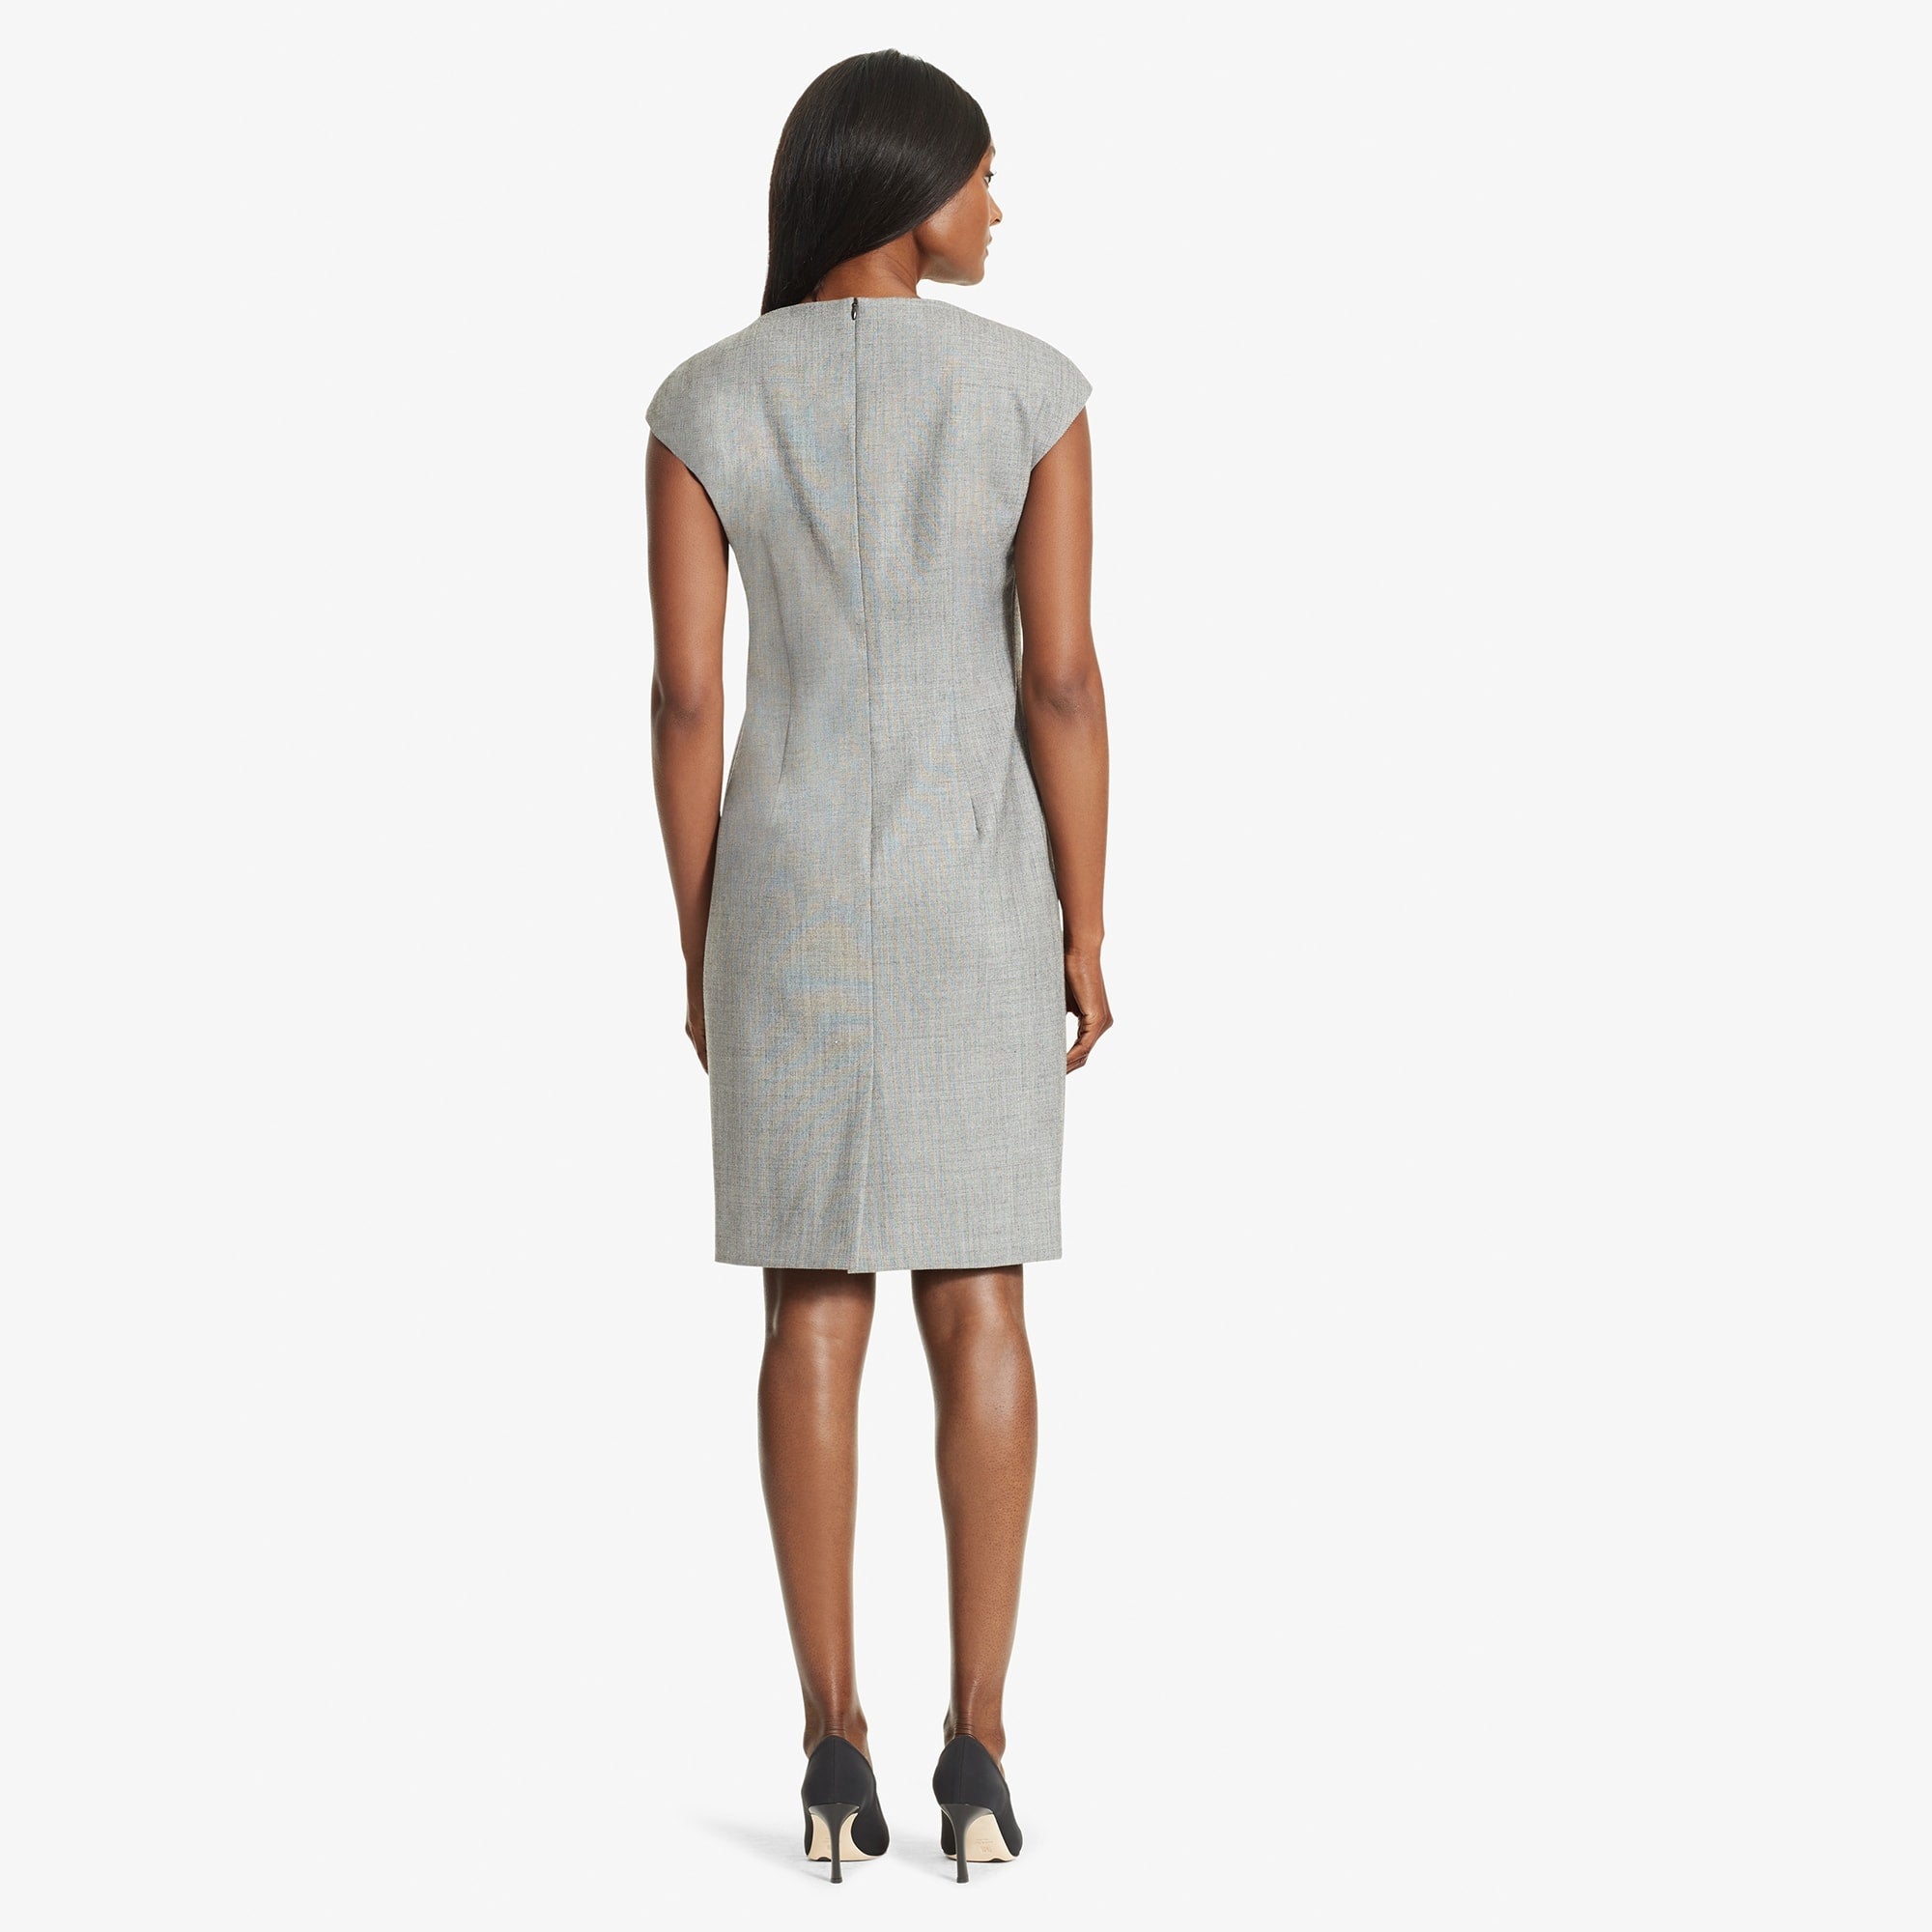 Back image of a woman standing wearing the Marilyn Dress Sharkskin in Black and White